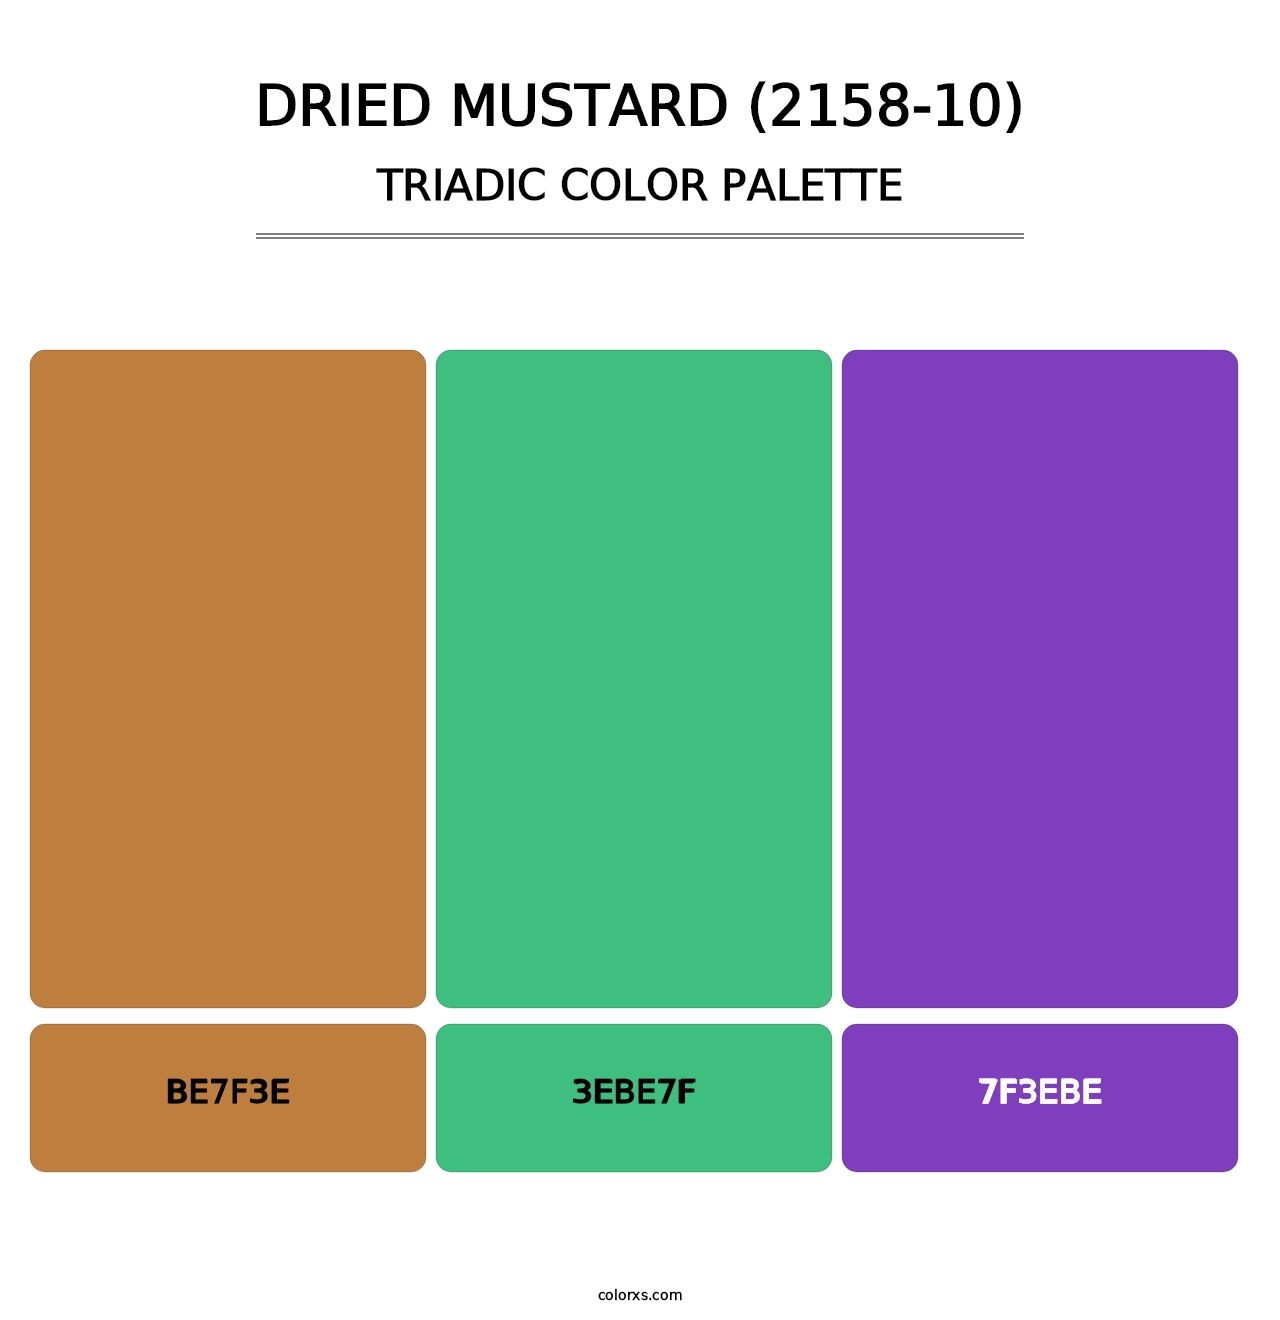 Dried Mustard (2158-10) - Triadic Color Palette